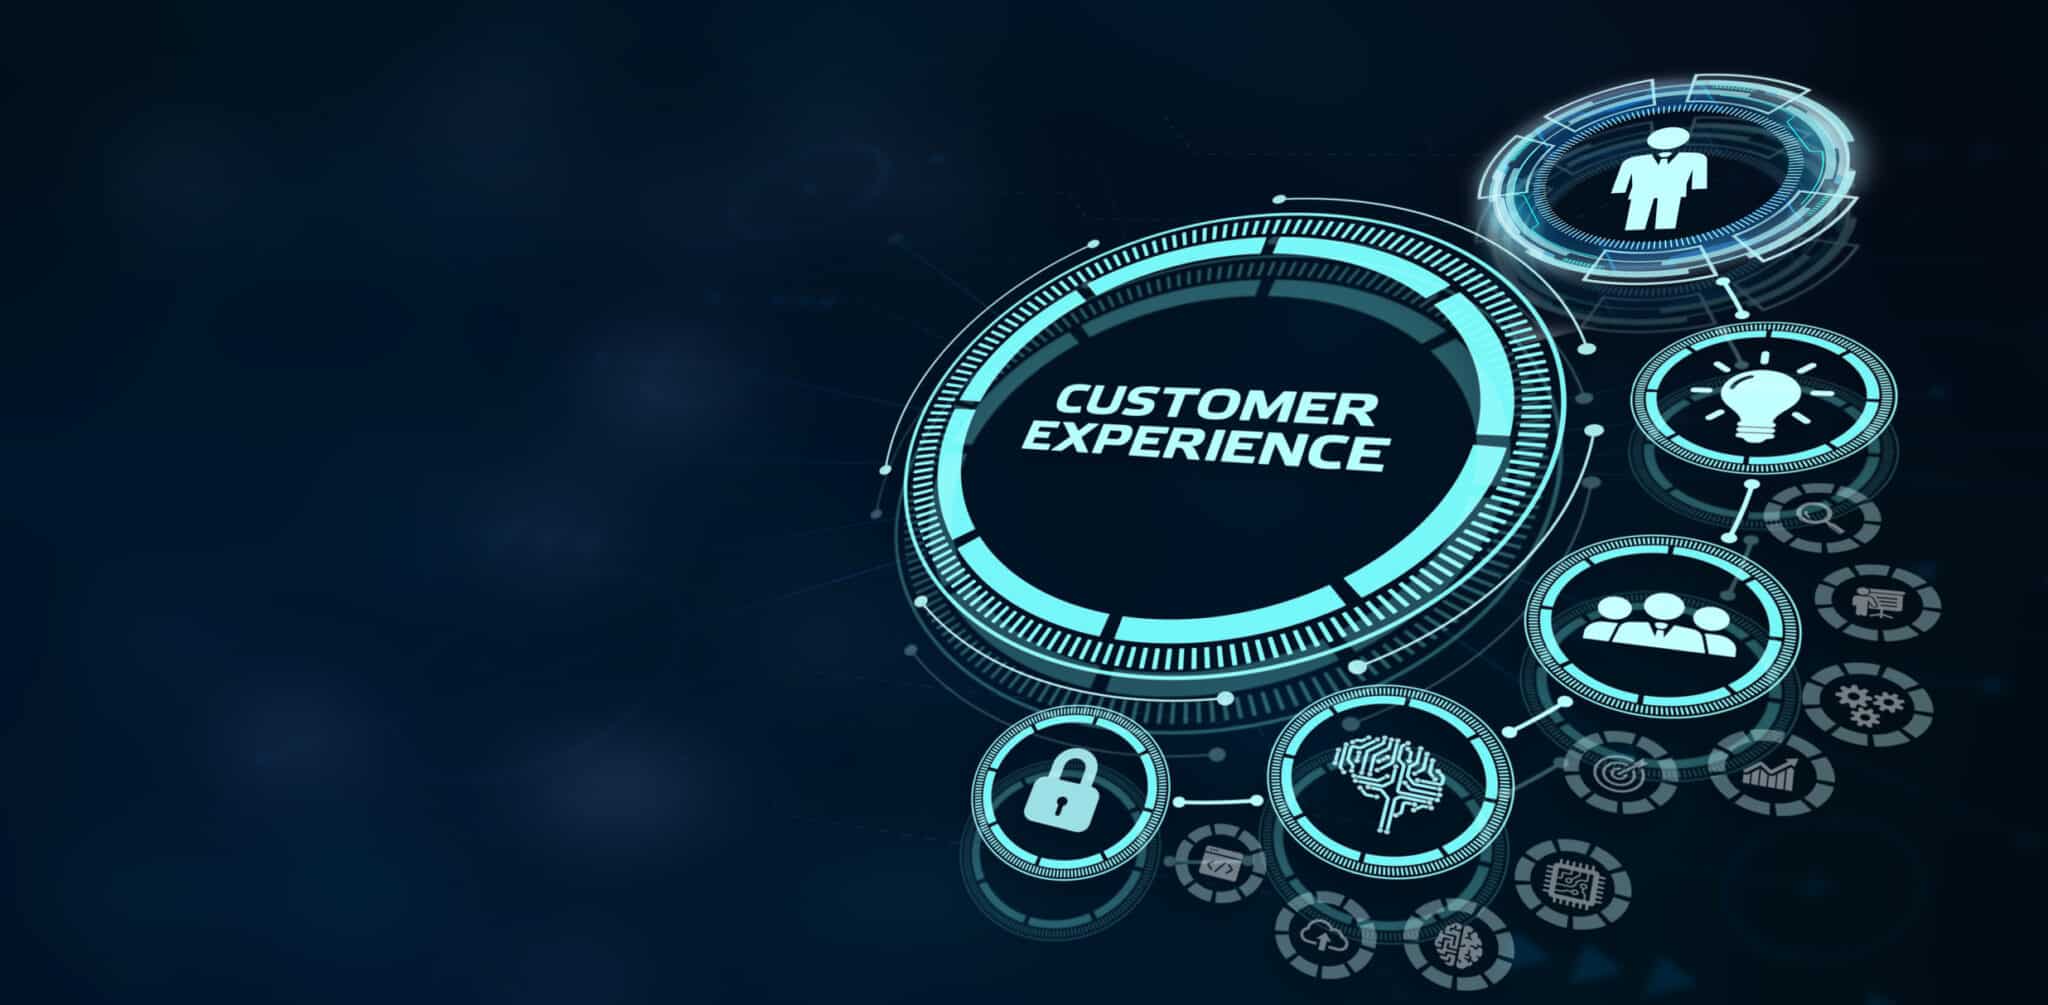 Customer Experience - Video Training for Customer Service